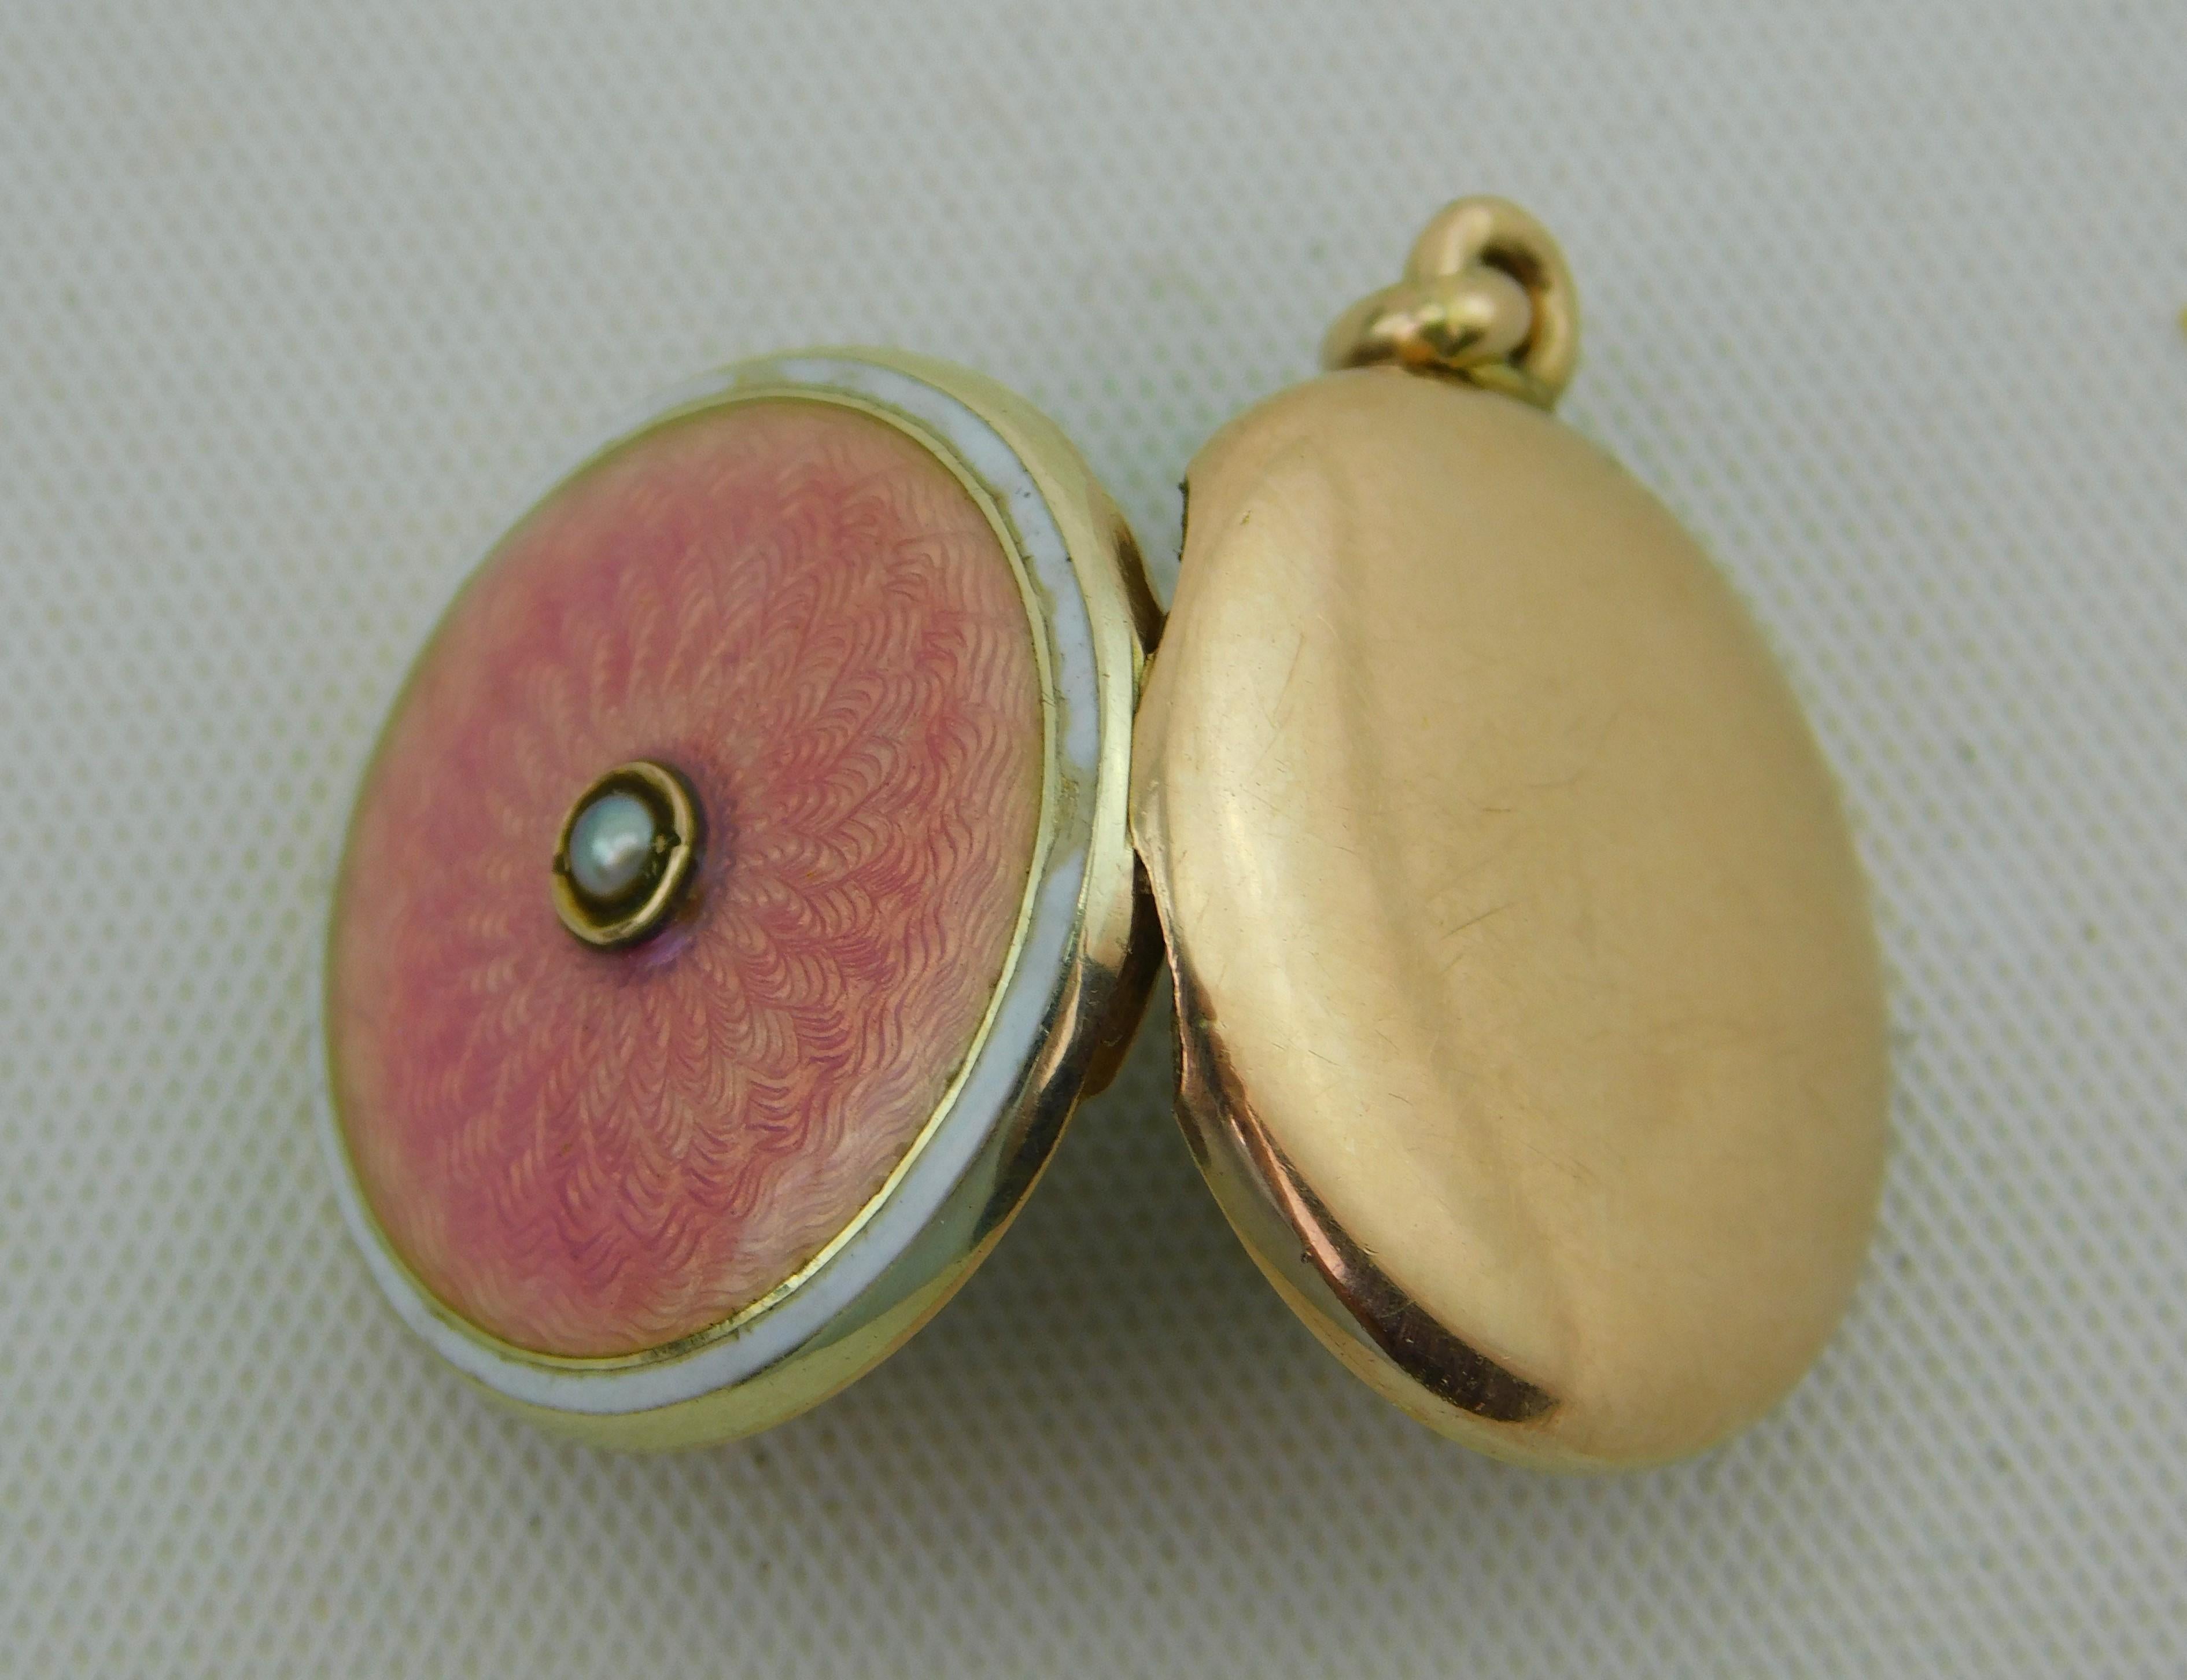 Attributed to German jeweler Ernst Gideon Bek (1872-1945) 10K gold beautiful pink floral design enamel locket pendant, with a single pearl in the middle and two black and white pictures of a couple inside.  Measure's 1.6 cm round, 2 cm to top of